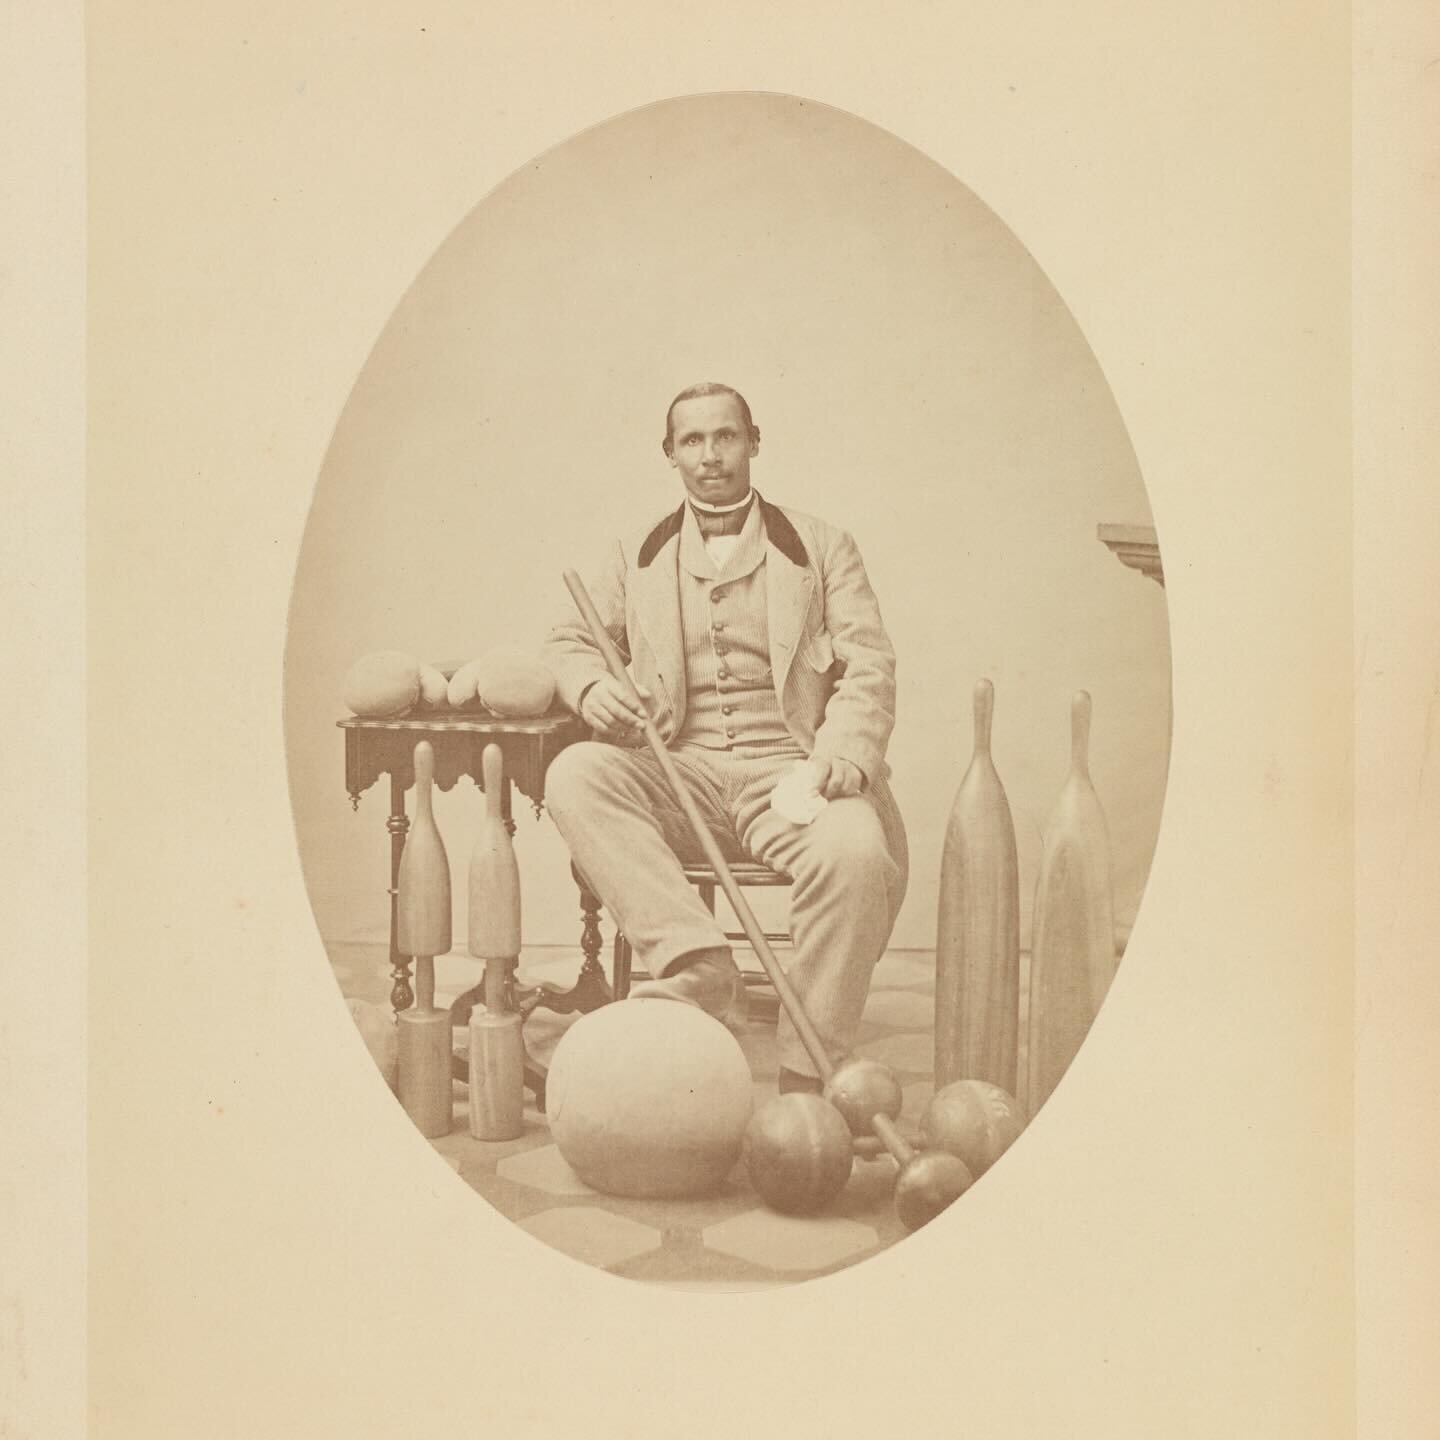 c 1859-1871, studio portrait of Aaron Molyneaux Hewlett, the first Black &ldquo;gymnasium coach&rdquo; at Harvard University {*day twelve of the new year 💫 &hellip;how are those gym resolutions coming along?! 👀💪🏾 I won&rsquo;t get into how I&rsqu